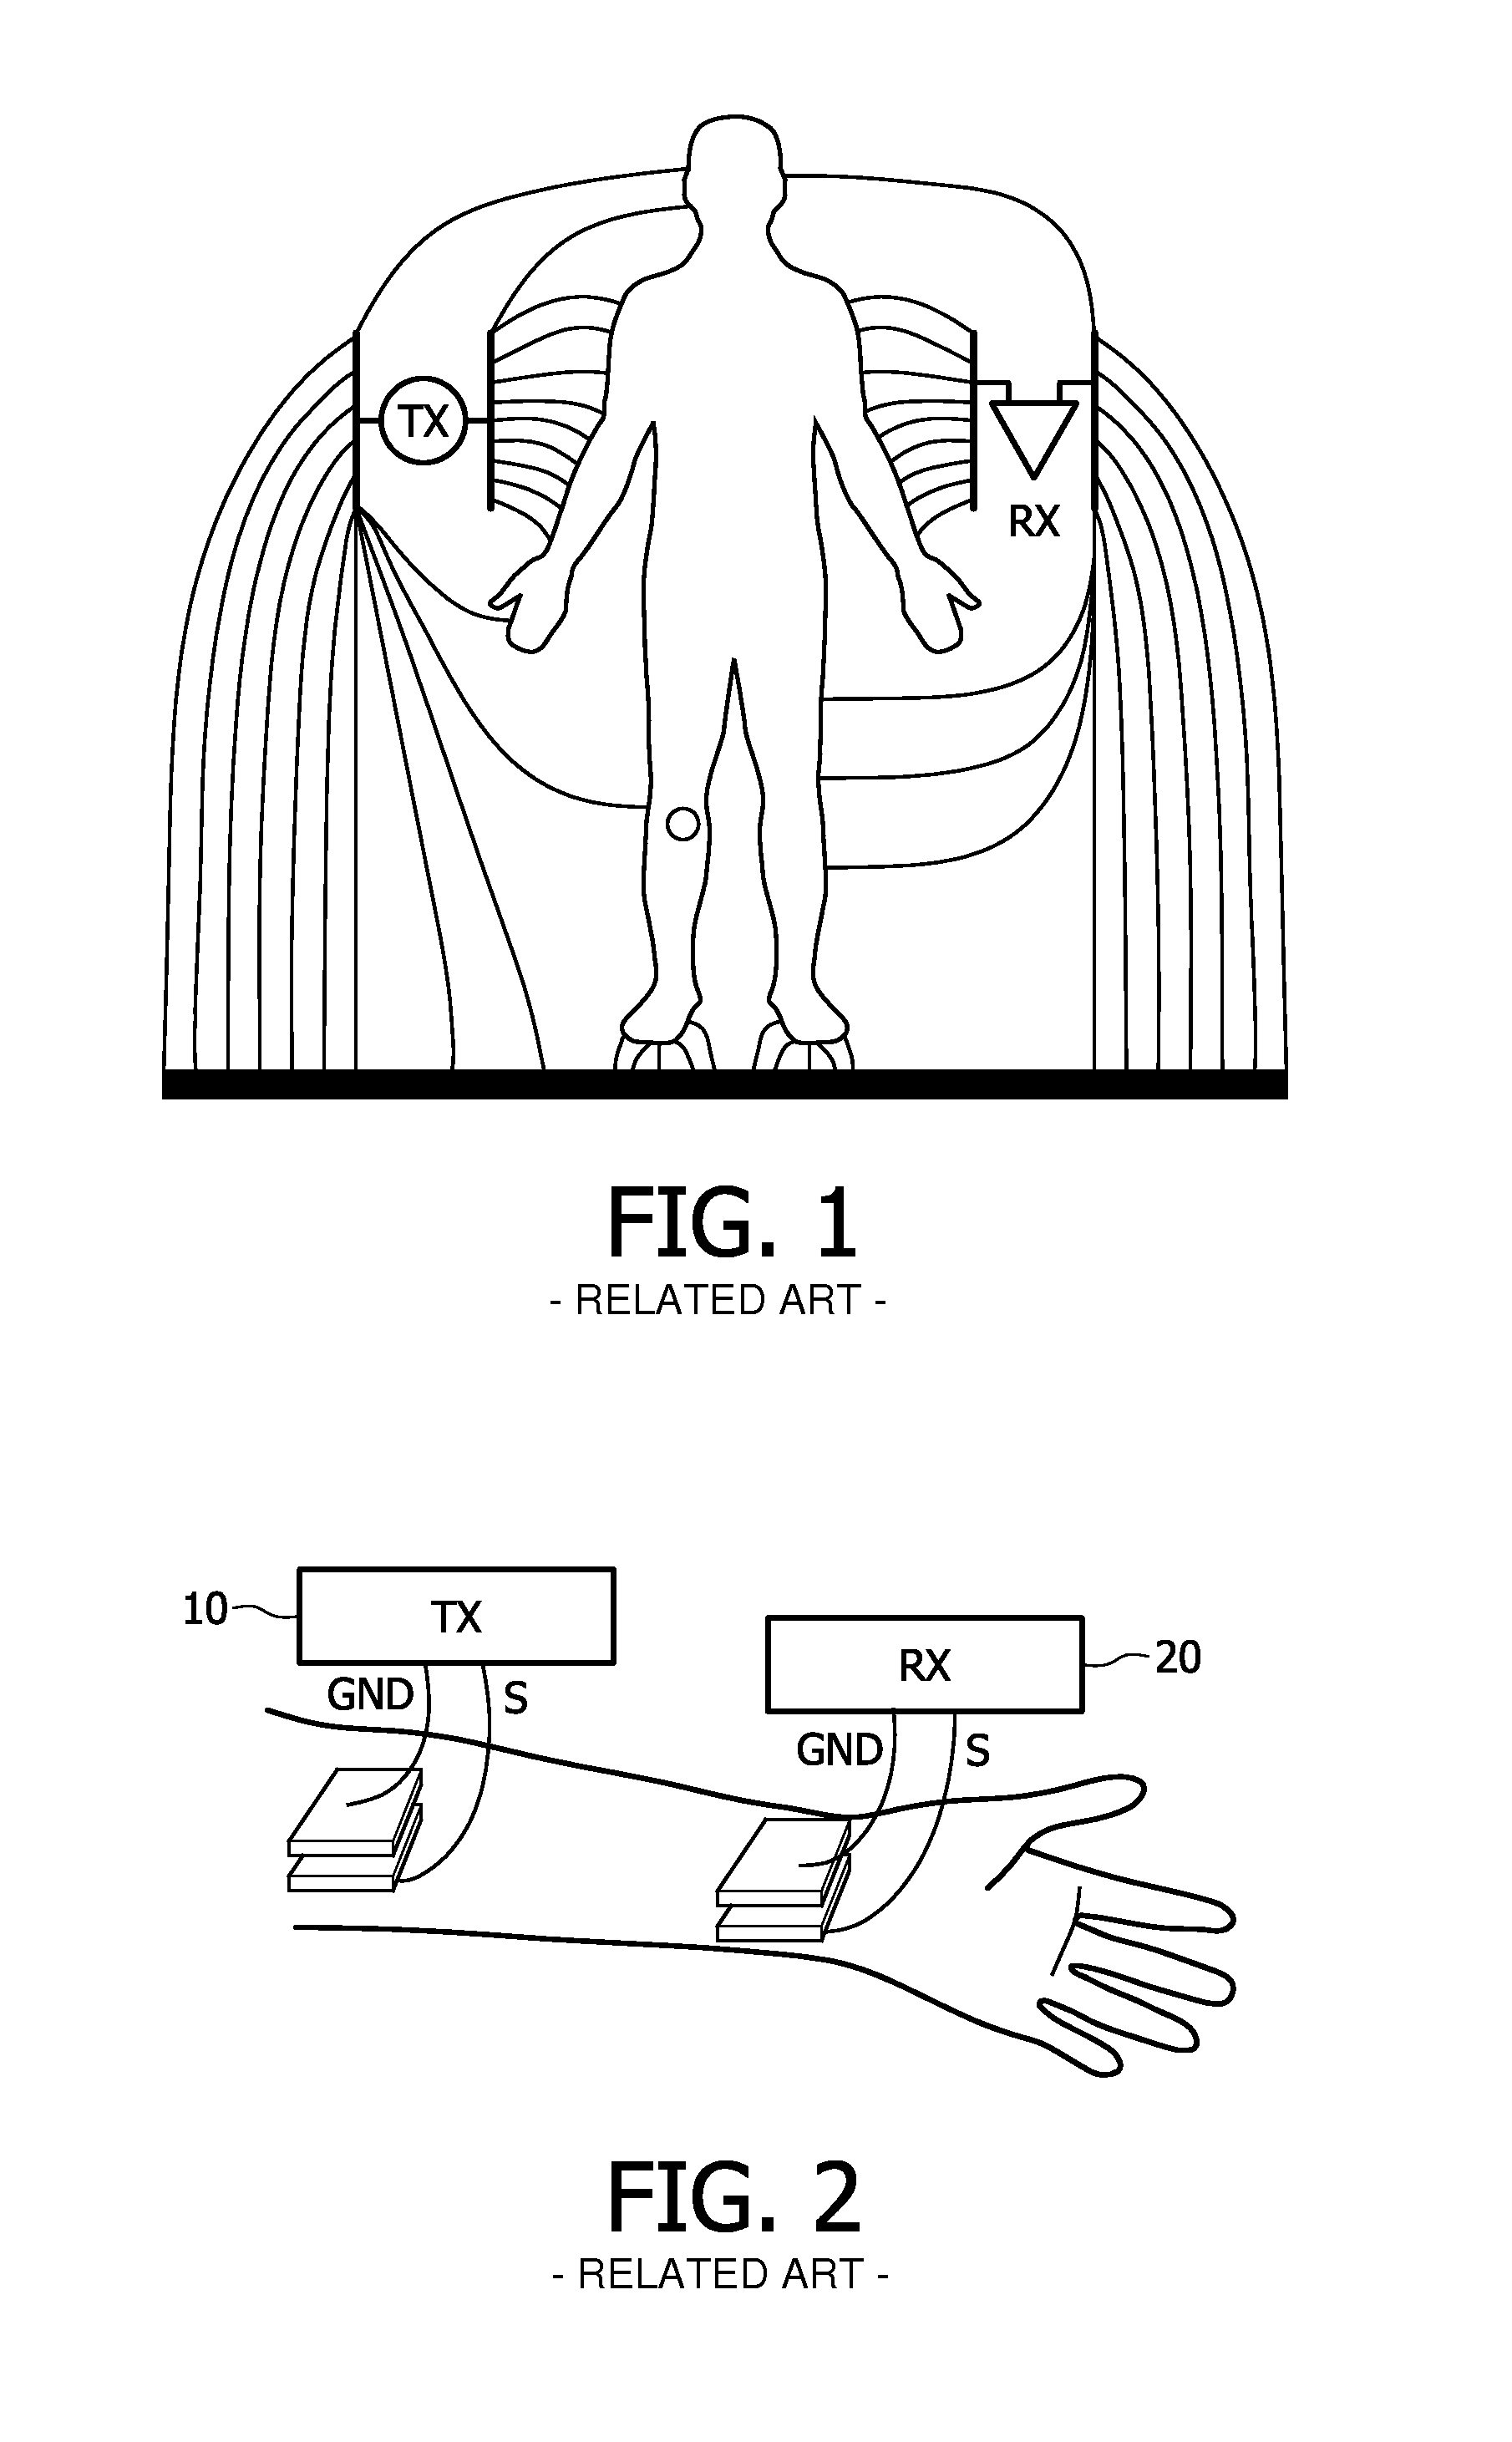 Wideband communication for body-coupled communication systems